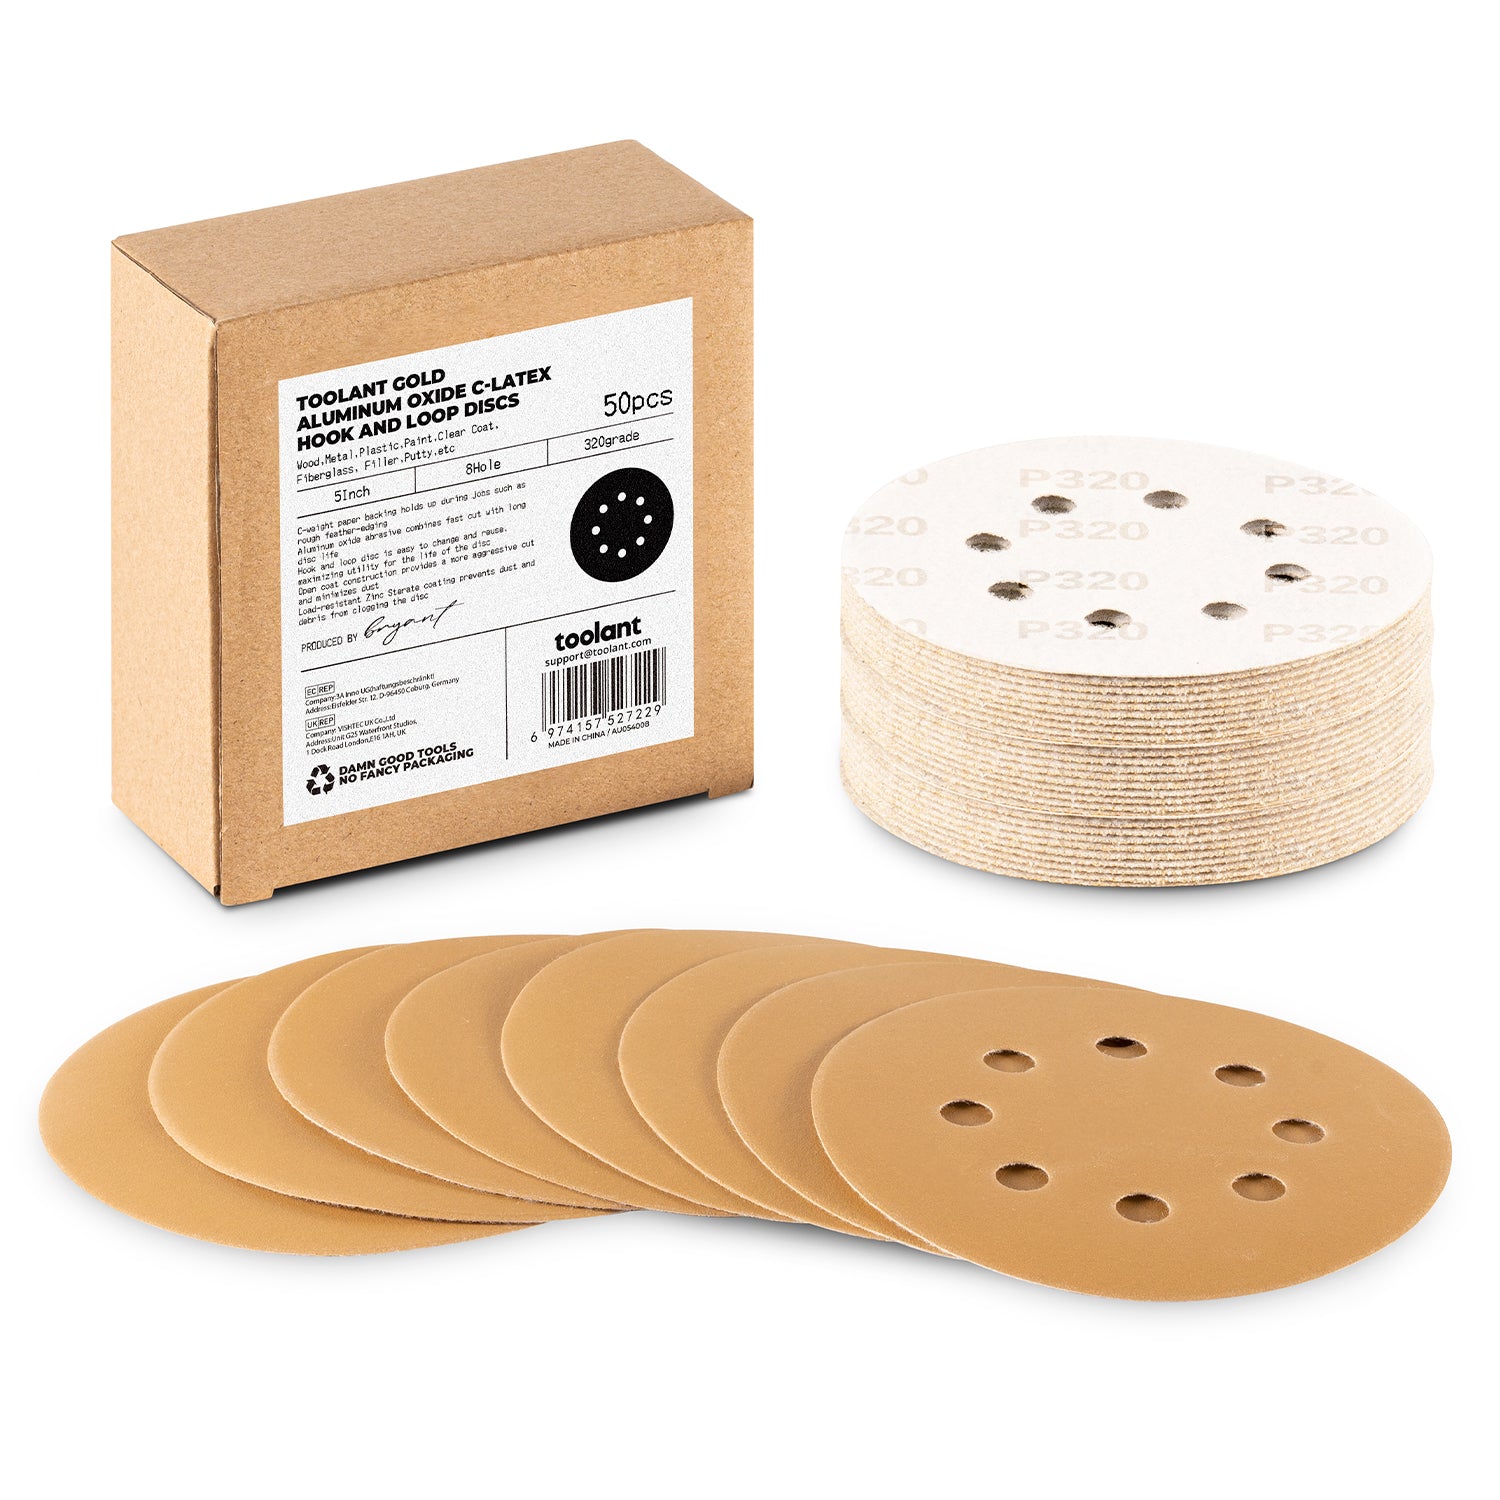 5 inch 8 Hole Sanding Discs Hook and Loop, 60-800 Grit, for Wood and Metal Sanding